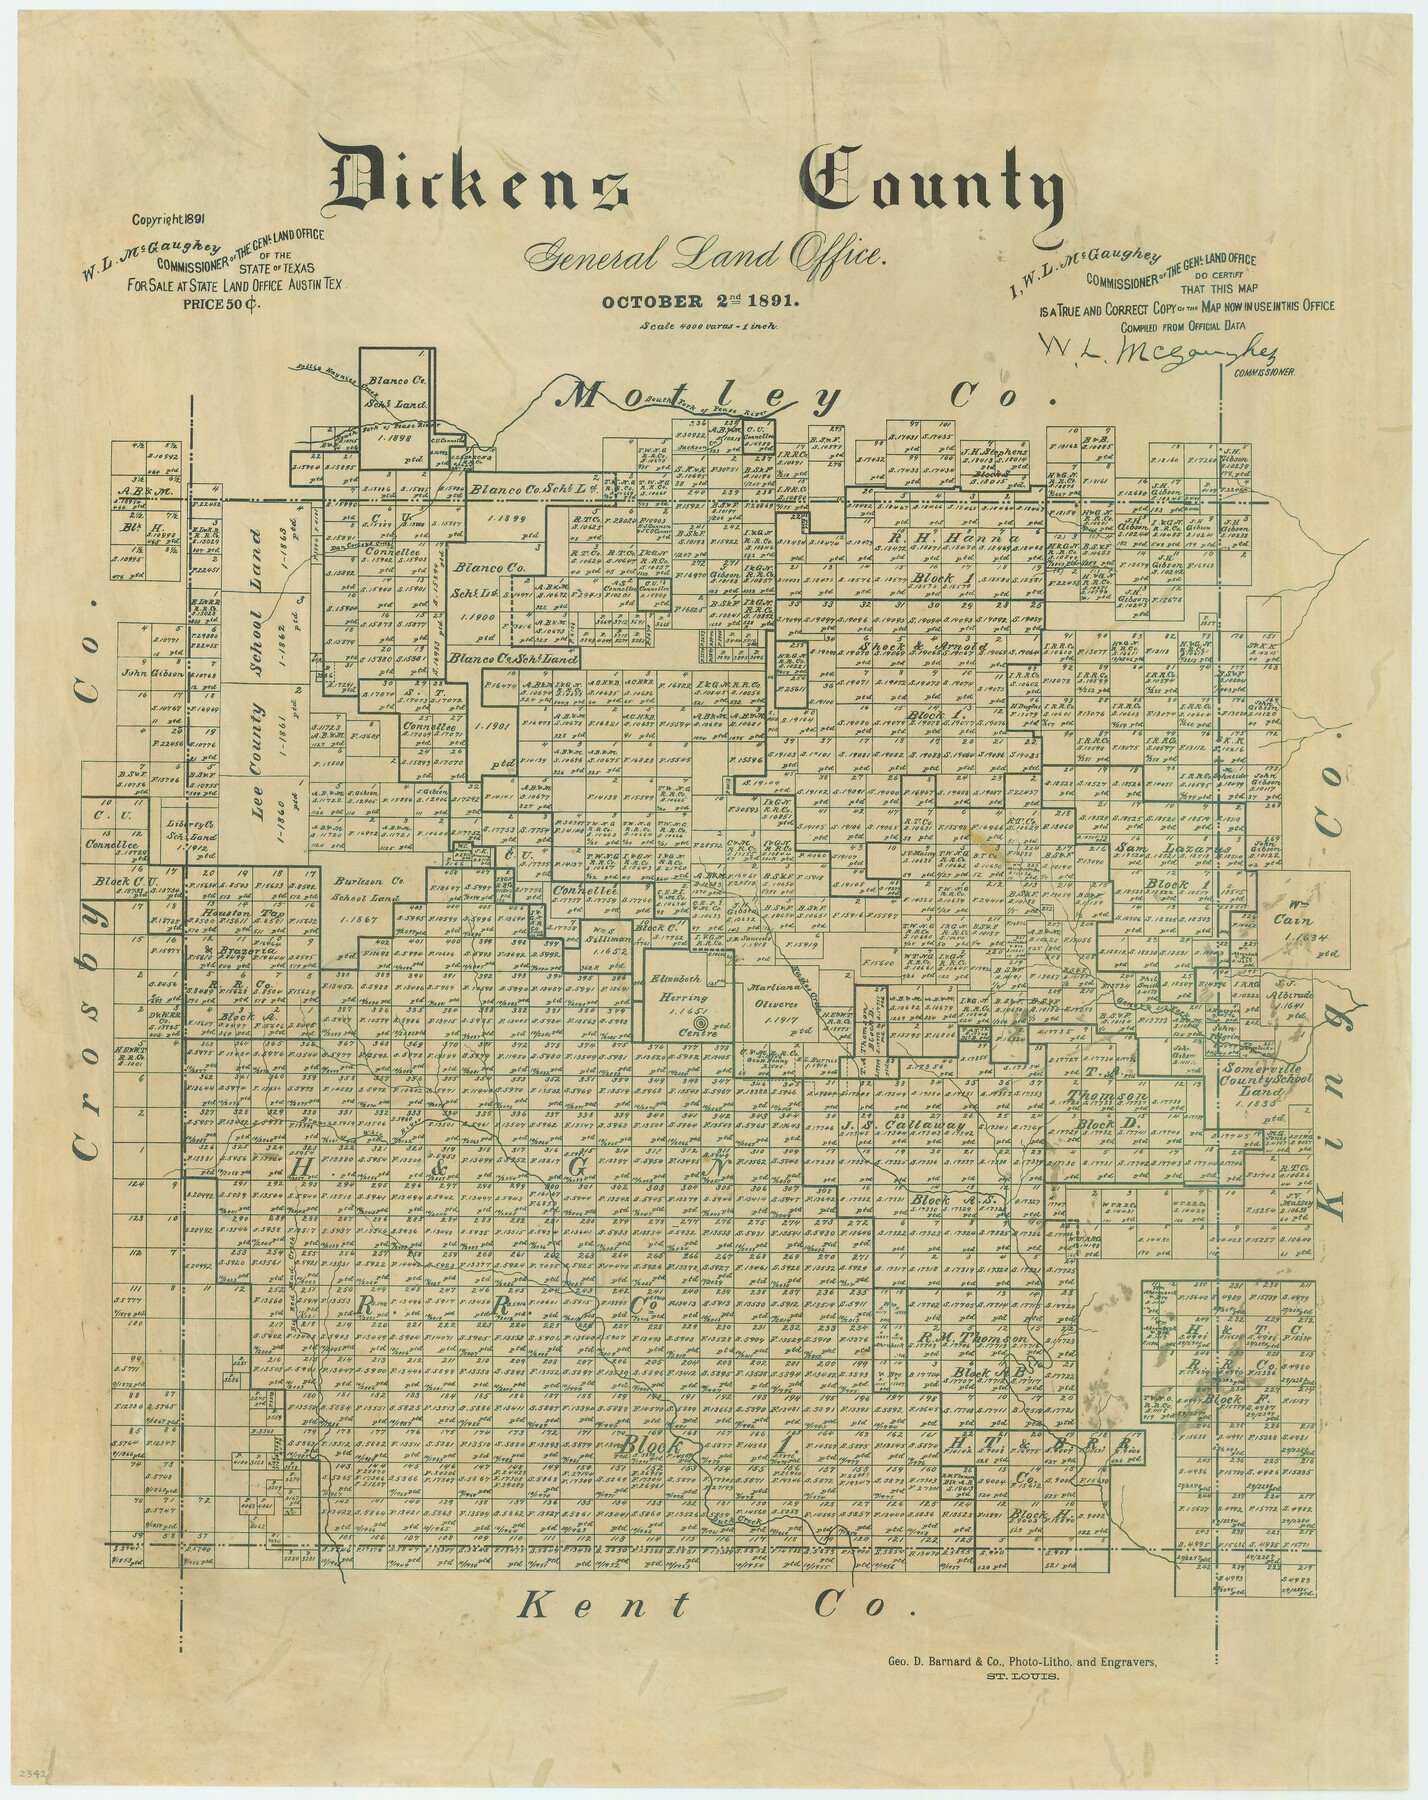 707, Dickens County, Texas, Maddox Collection